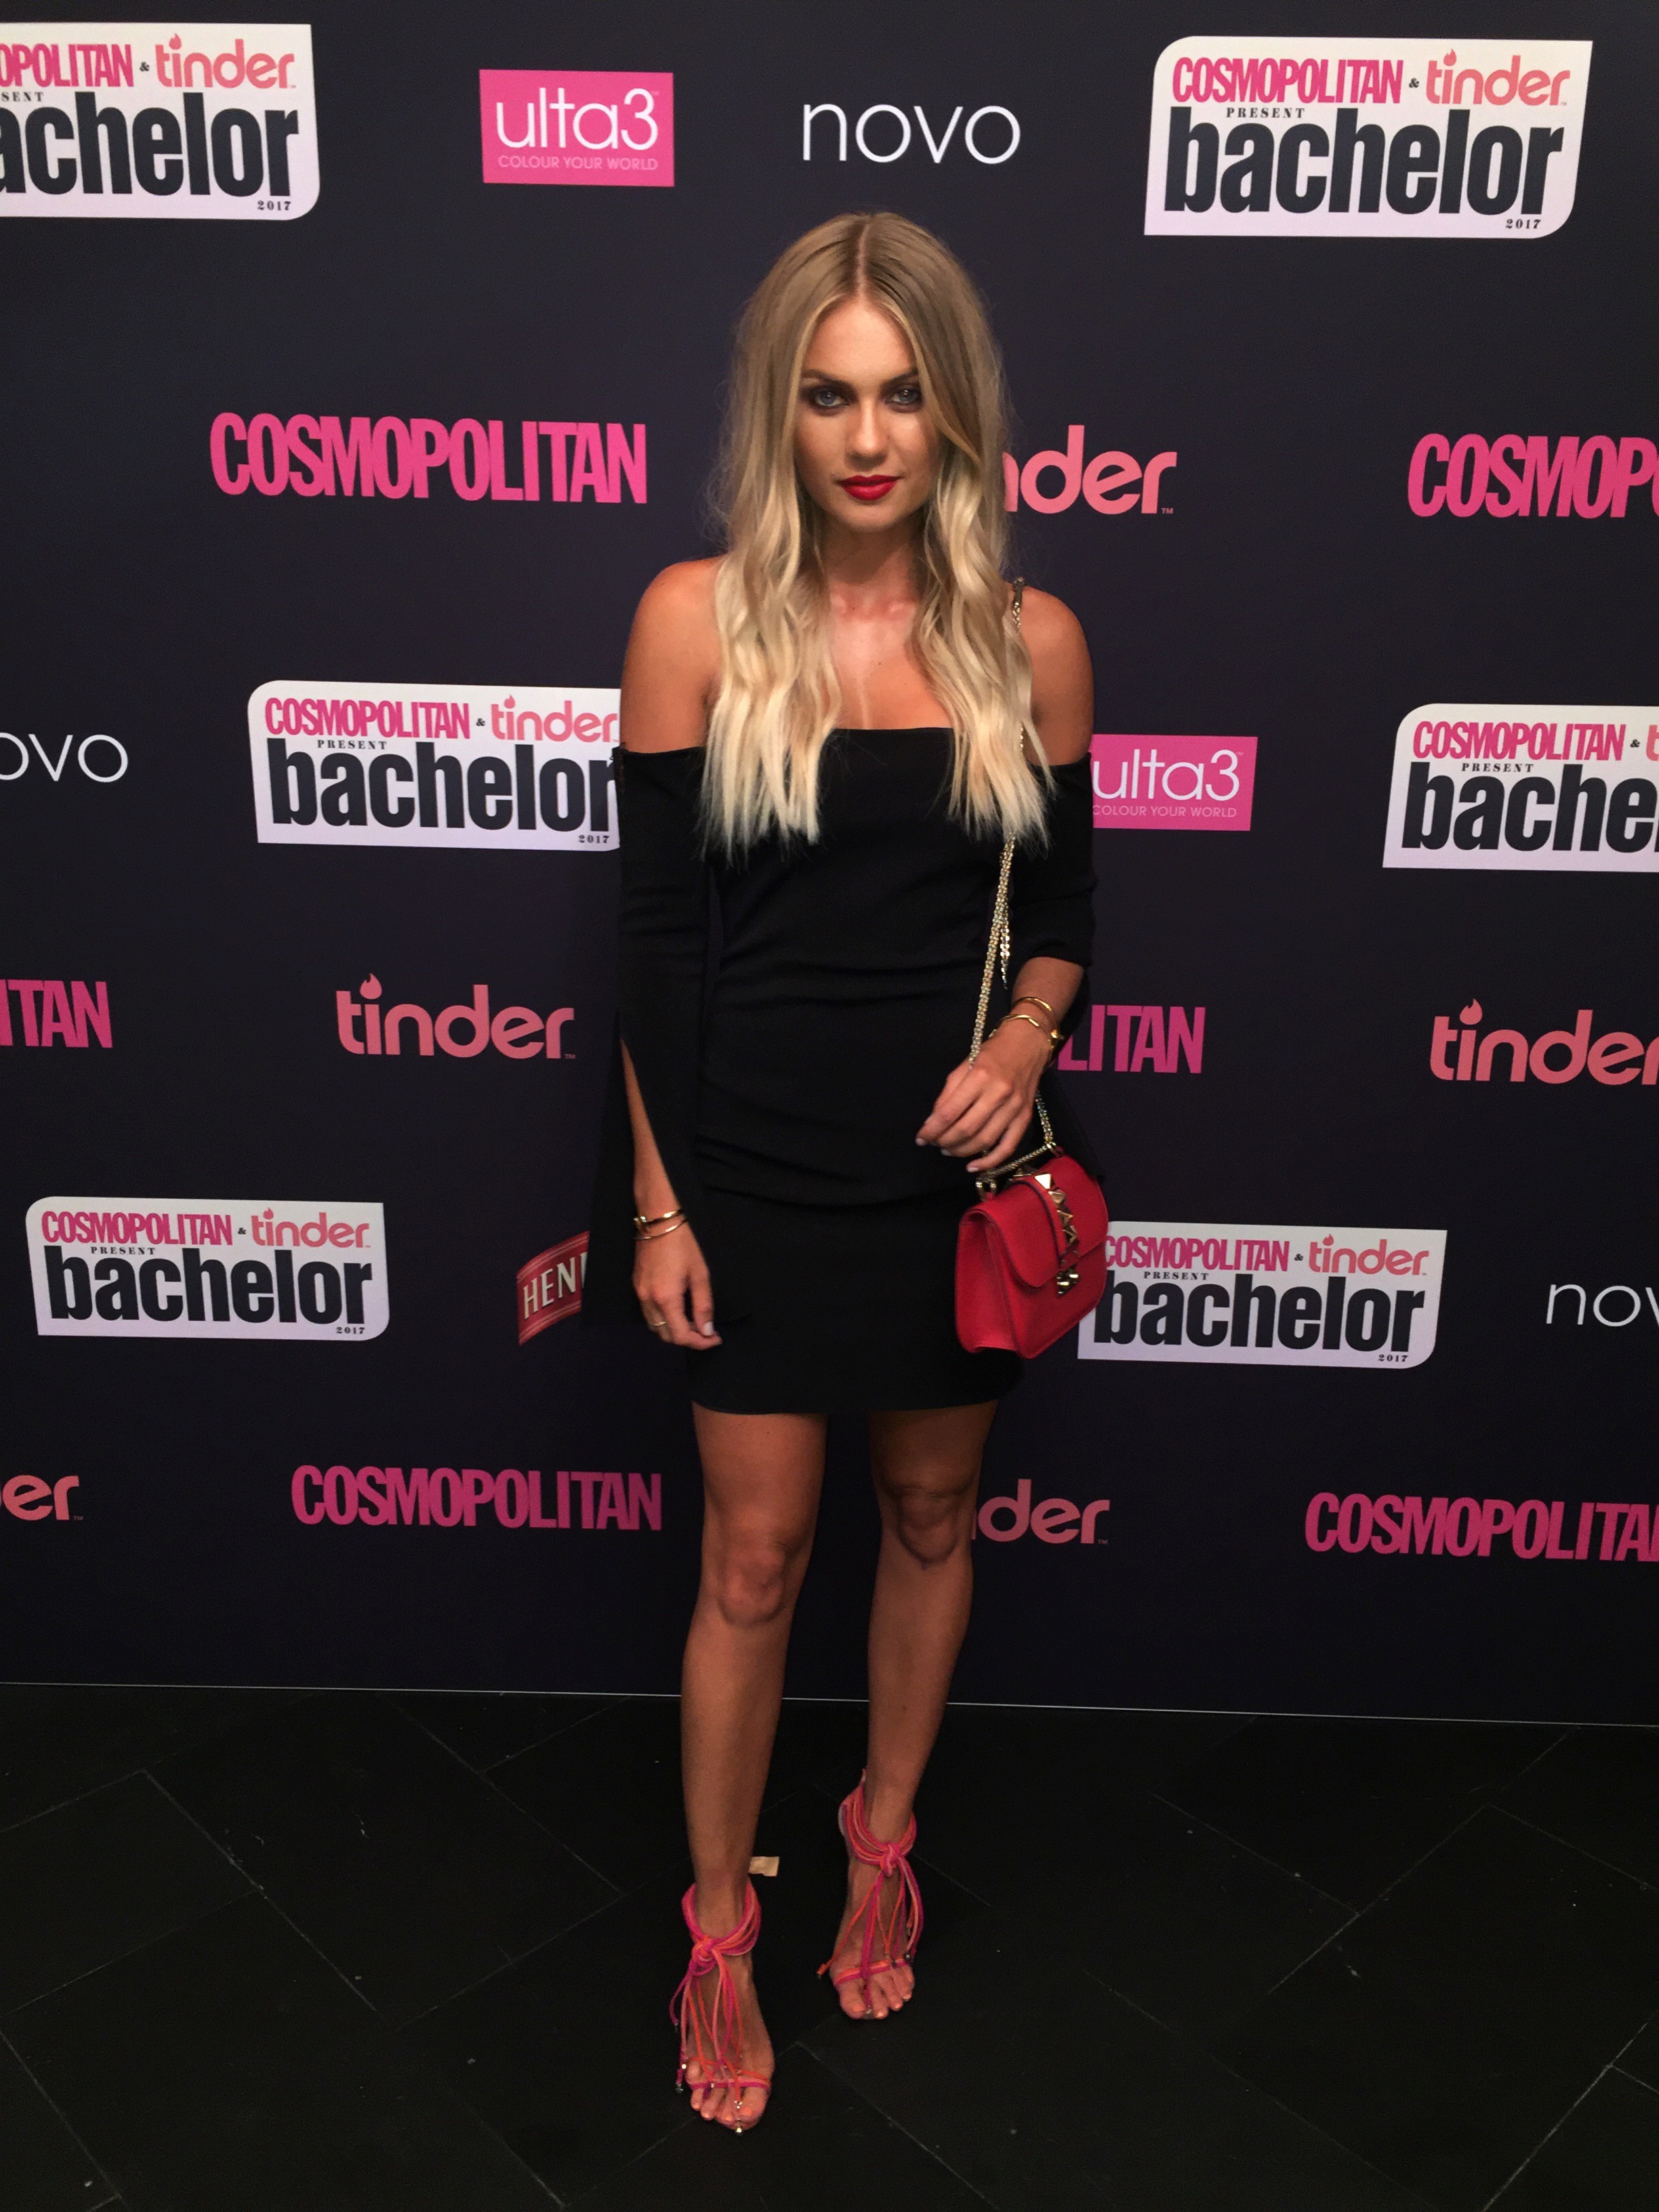 Elyse Knowles Cosmo Bachelor Of the Year Awards 17_5619.JPG